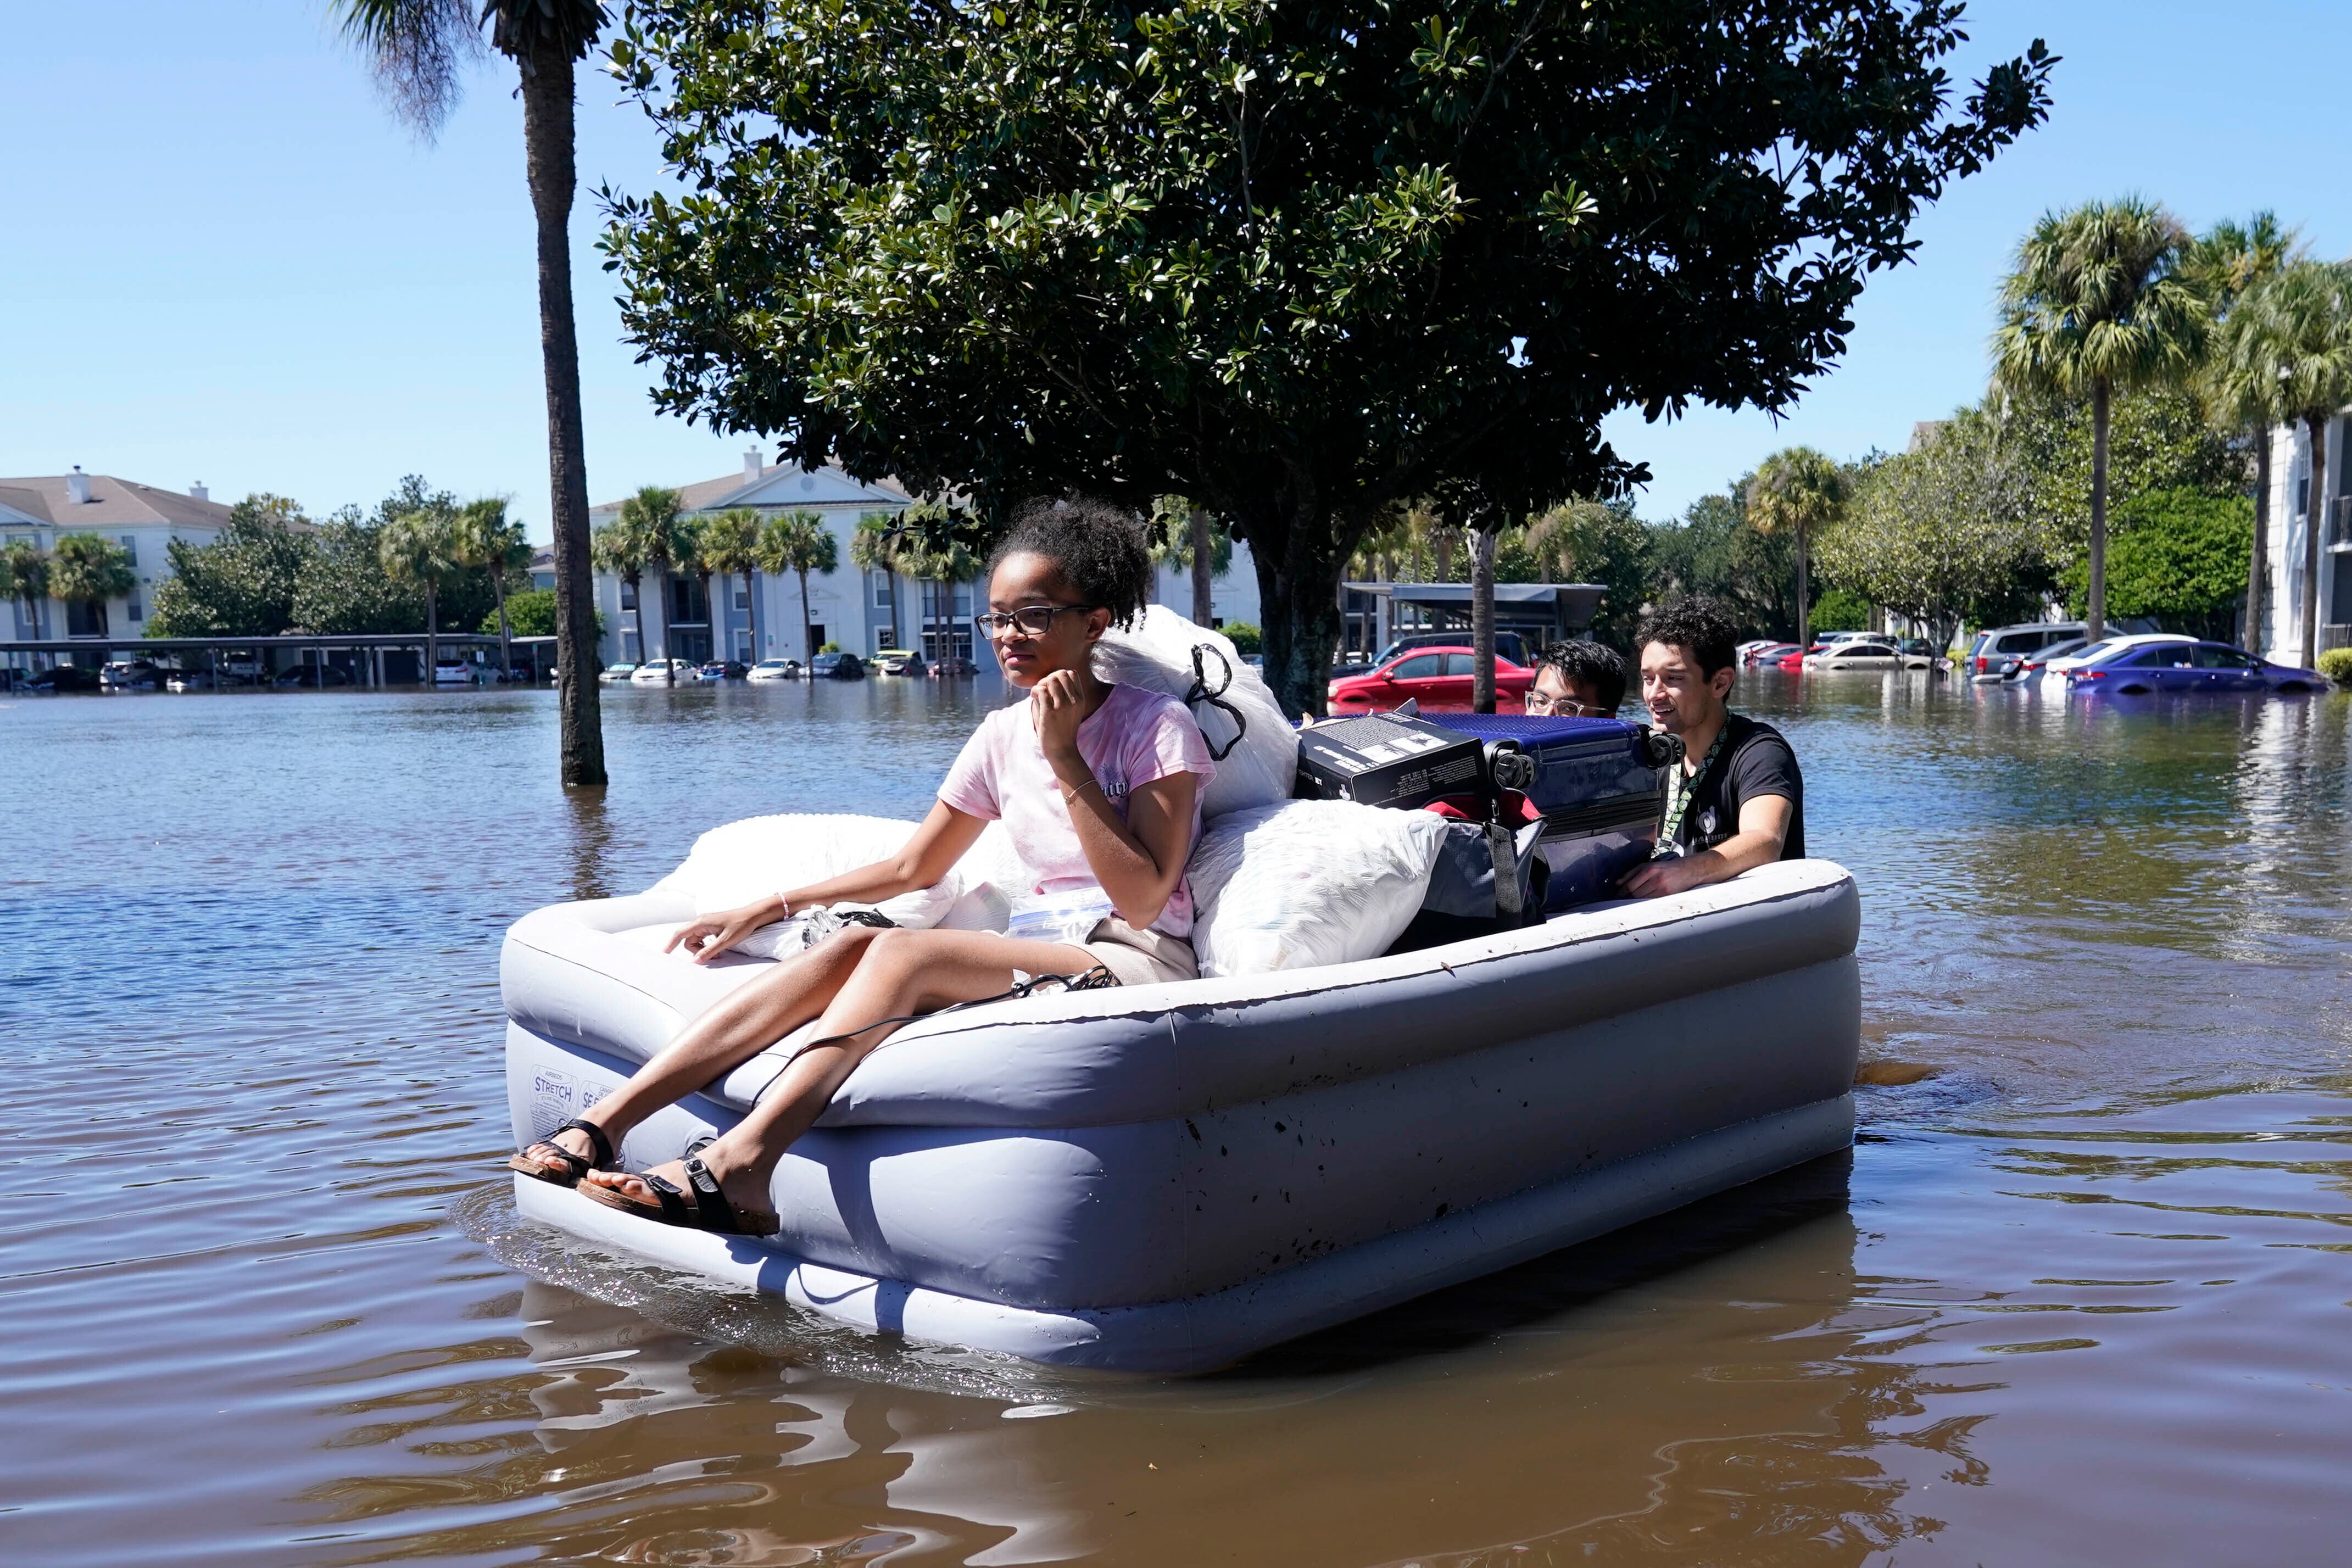 University of Central Florida students use an air mattress to leave a flood apartment complex in Orlando on Friday